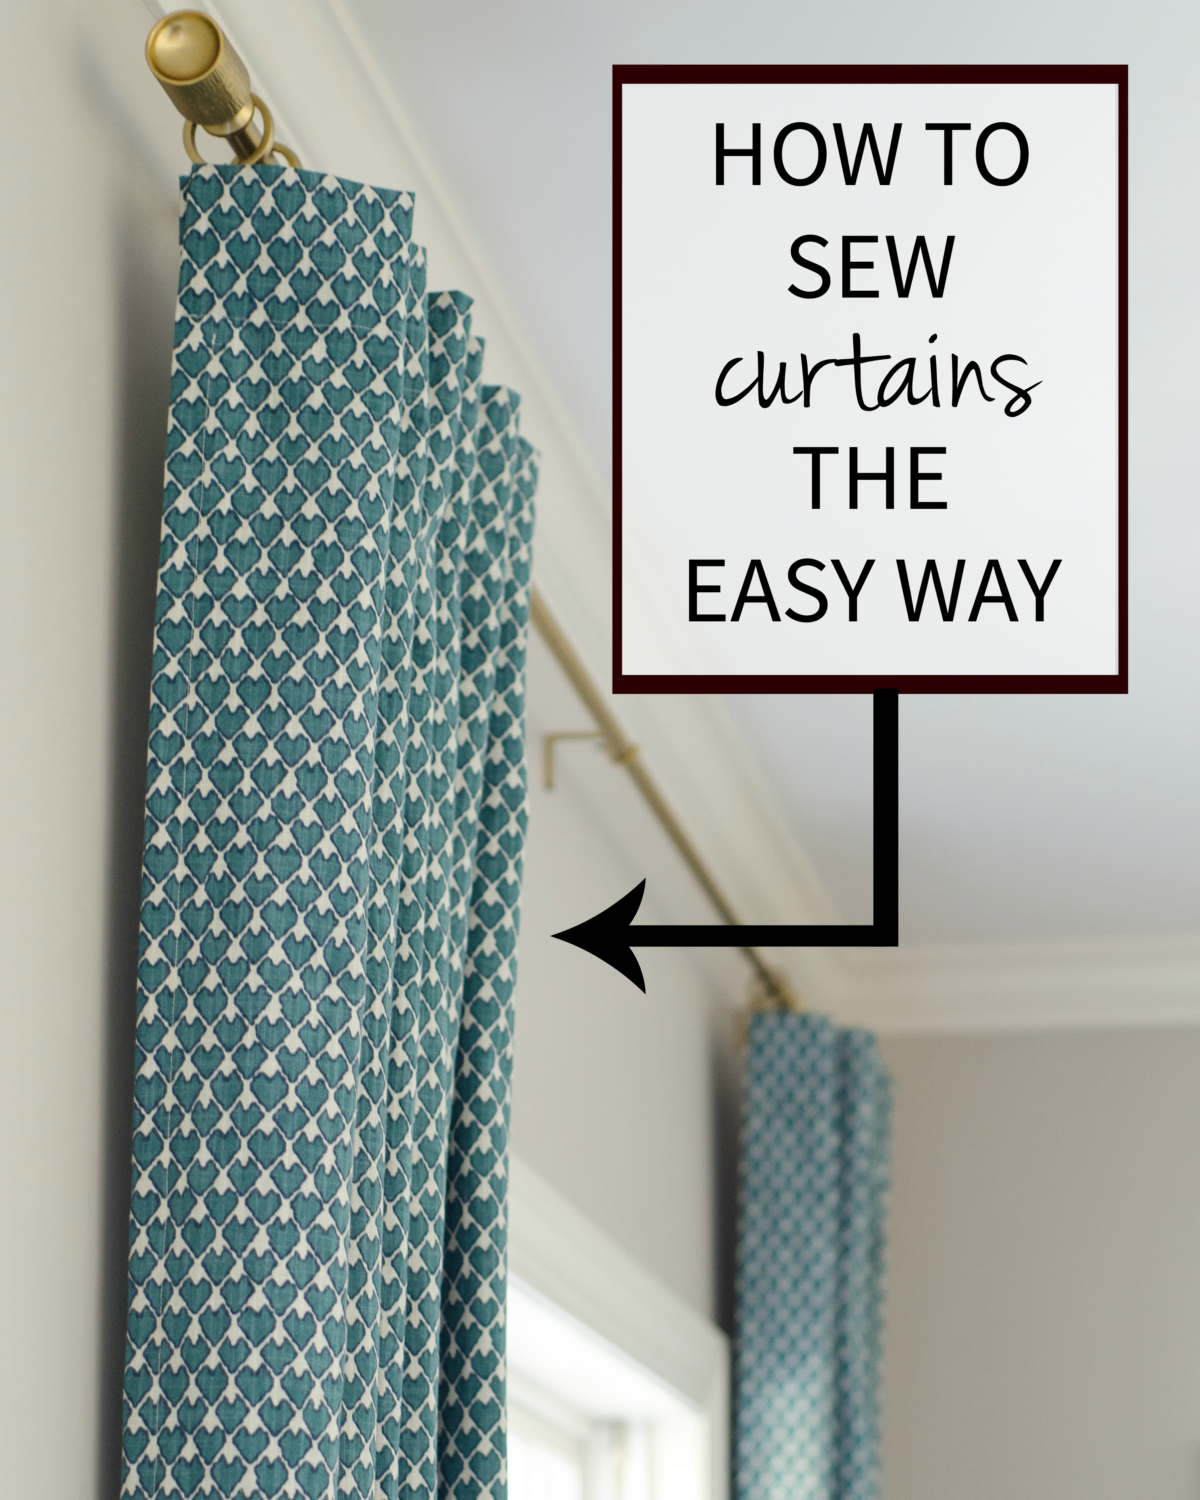 How to Sew Curtains the Easy Way - The Chronicles of Home